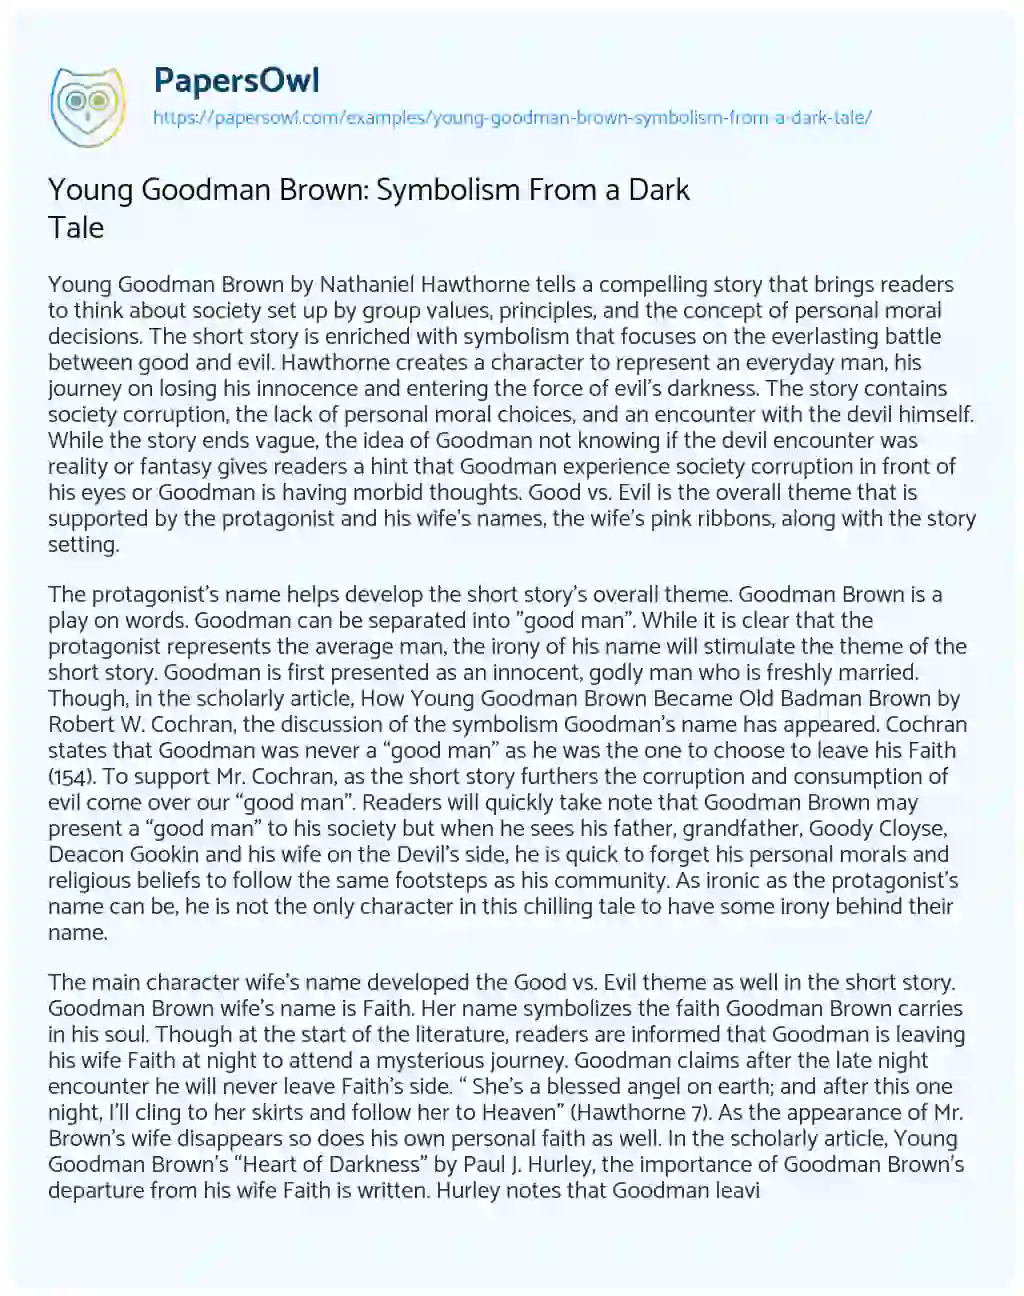 Young Goodman Brown: Symbolism from a Dark Tale essay